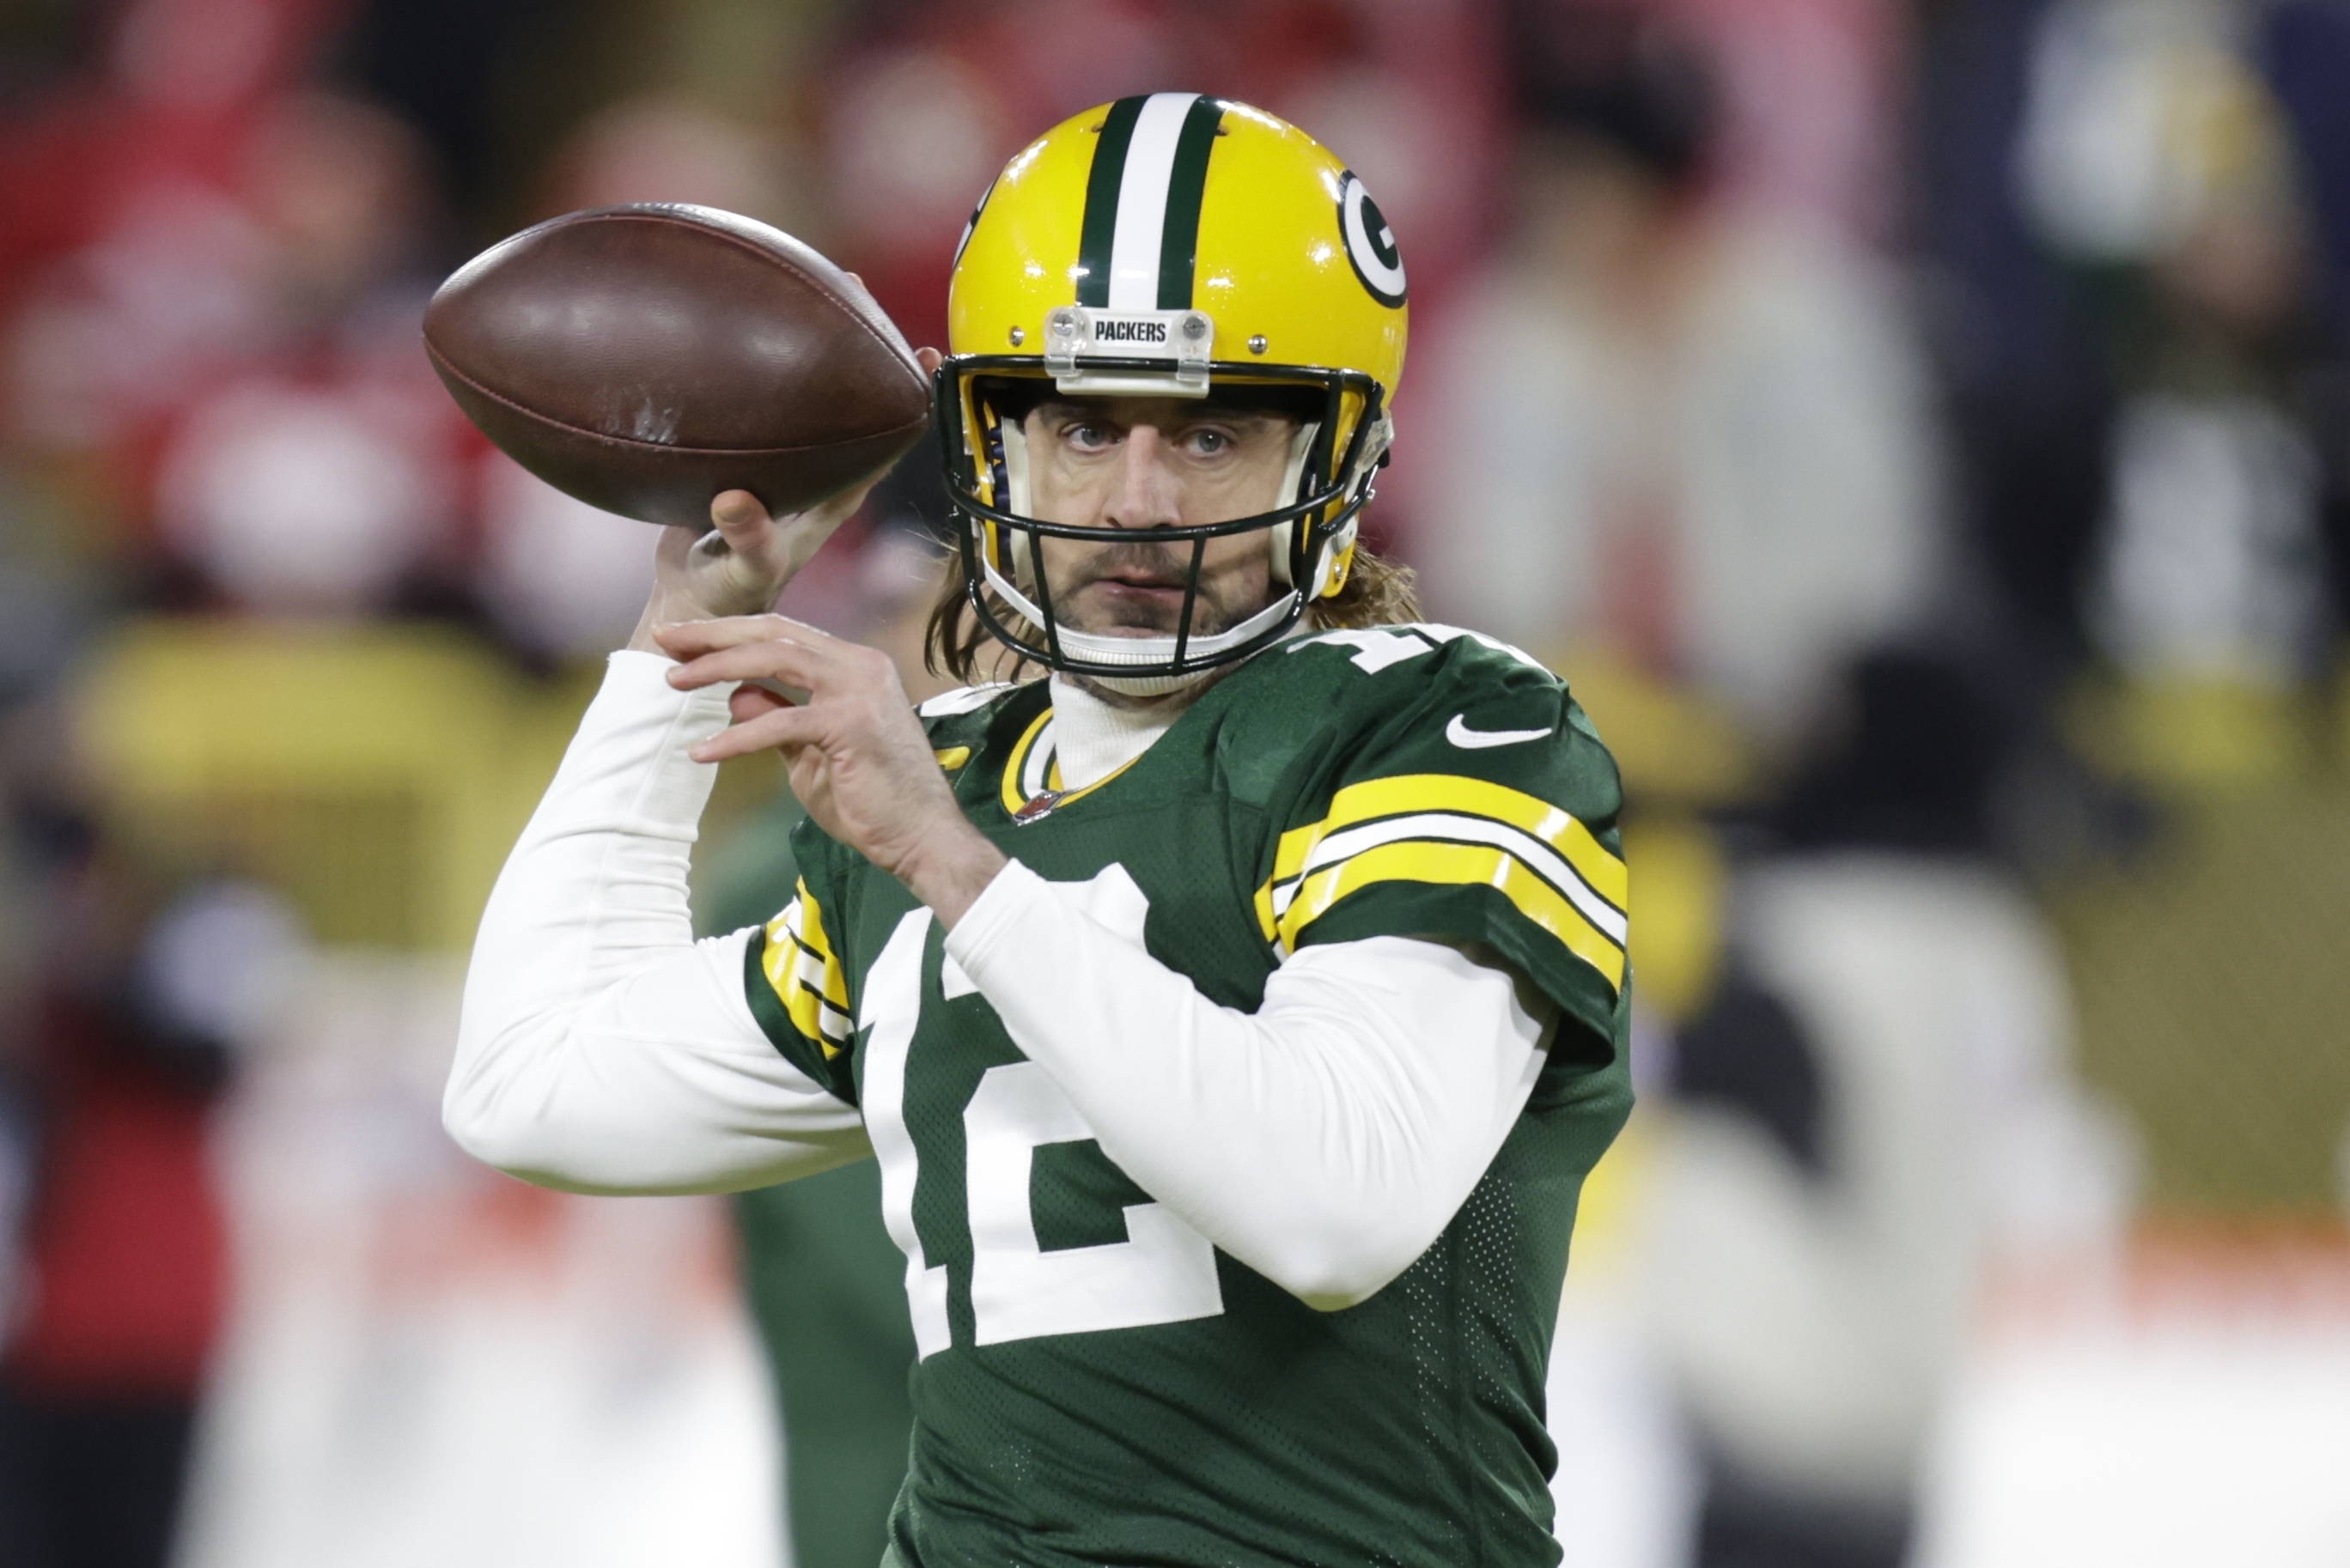 Aaron Rodgers is coming back, but what will his new deal look like?